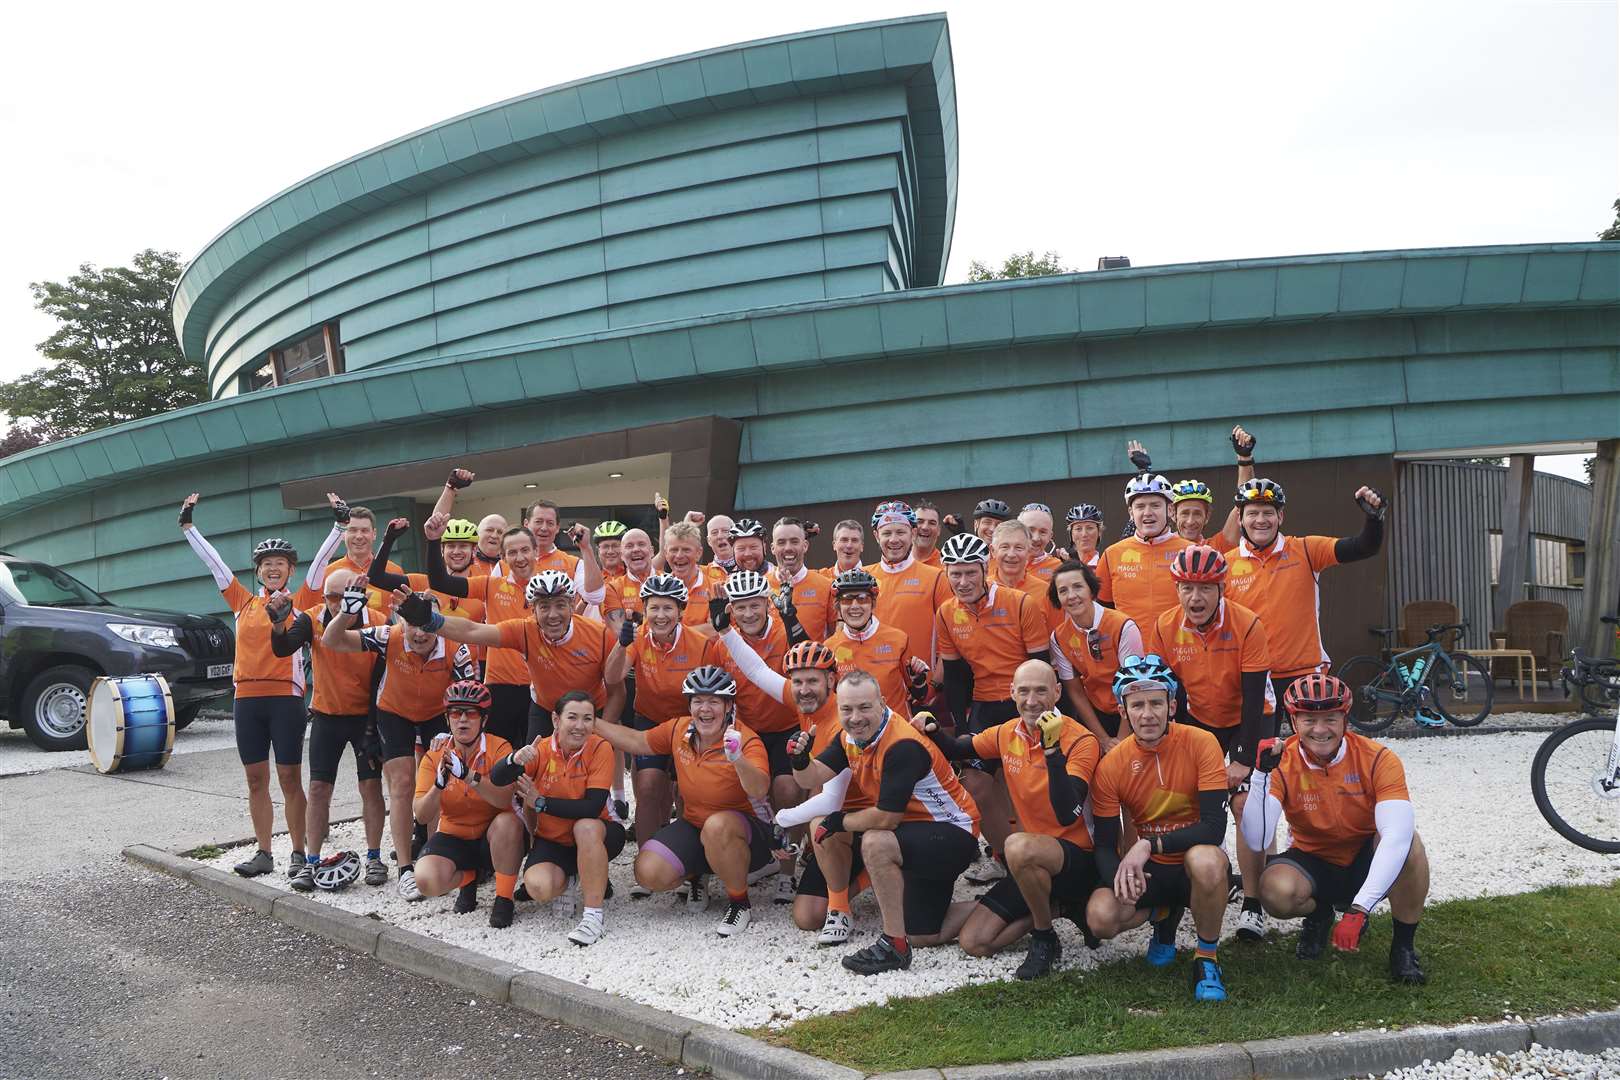 The 40-strong team of cyclists undertook a gruelling 500-mile challenge for the Maggies Highland centre.